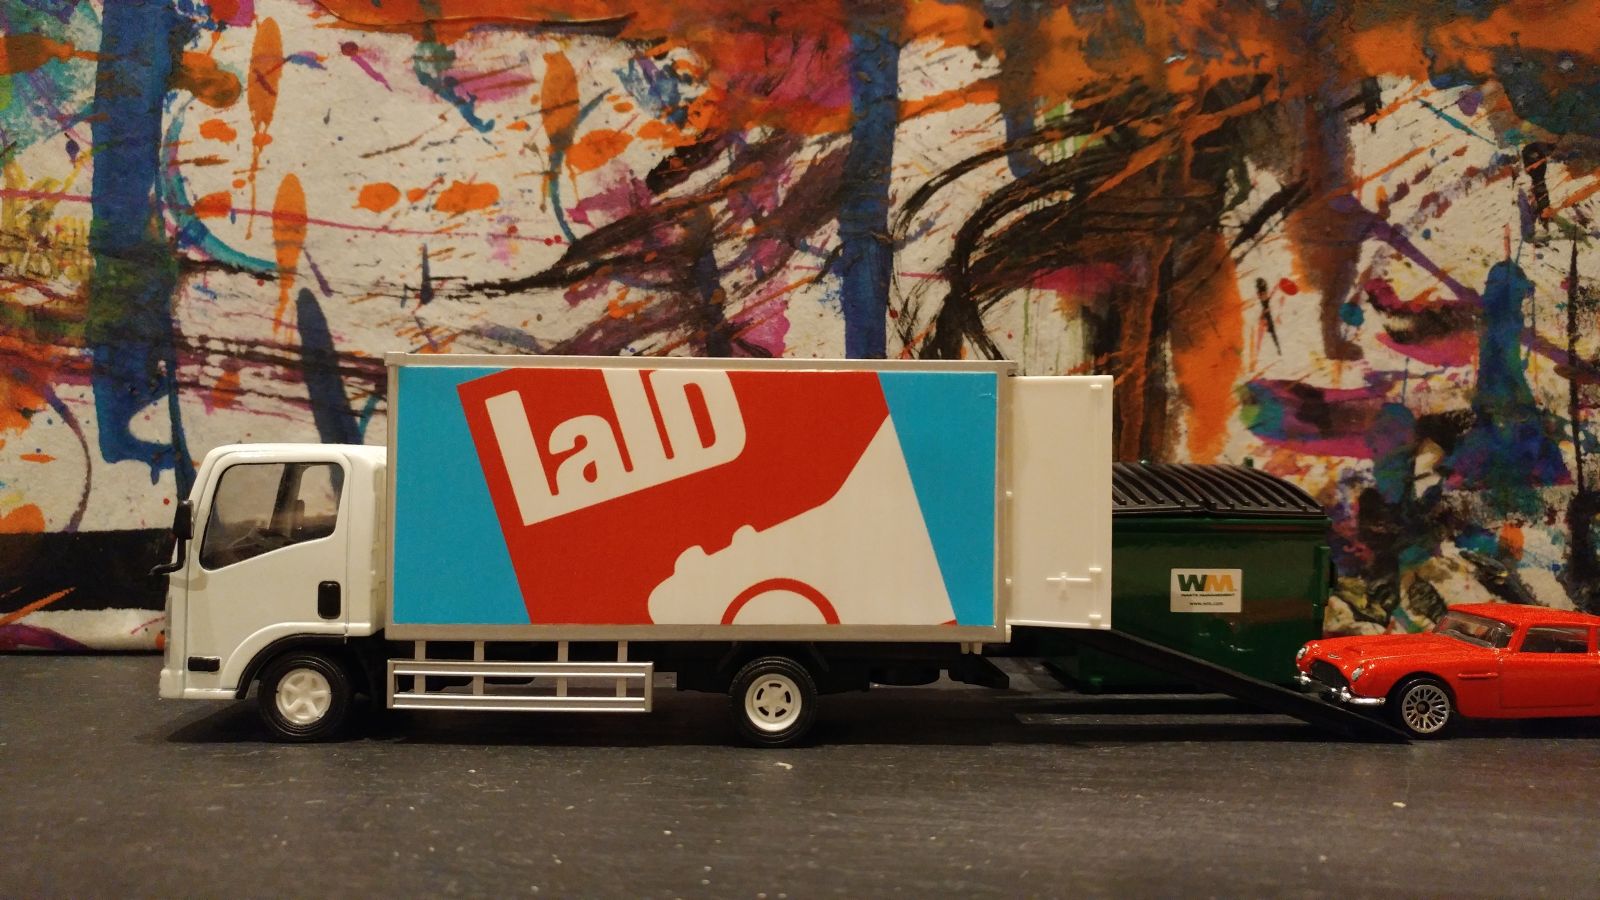 Illustration for article titled LaLD Car Week - Free For All Friday: Tyo Toys Box Truck